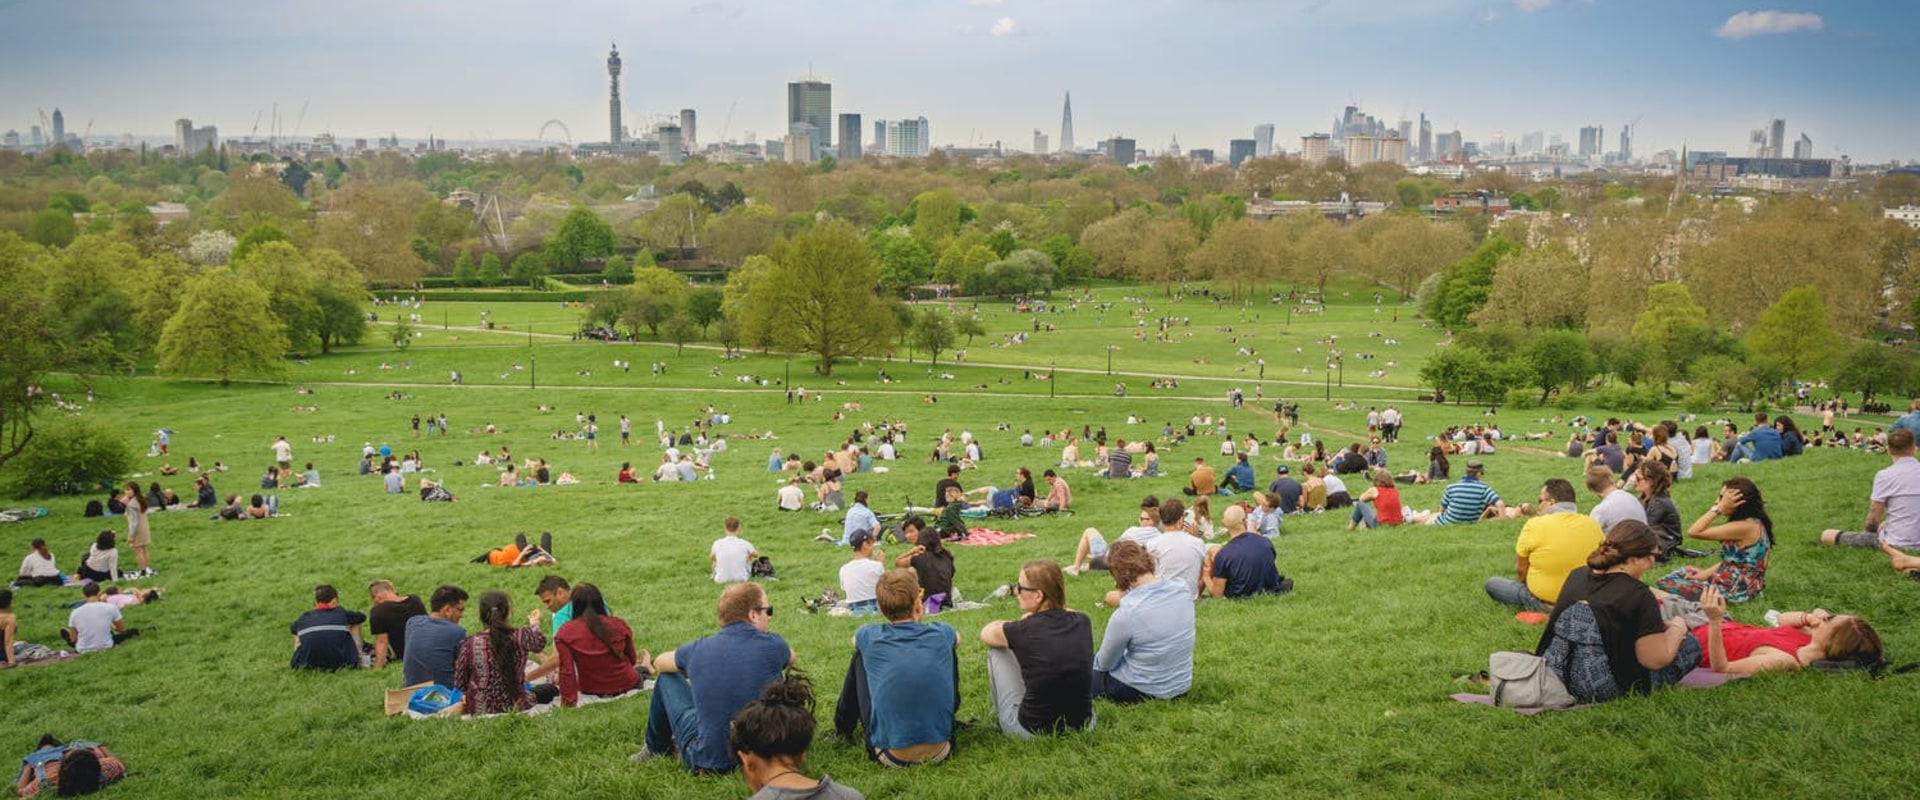 Exploring London's Outdoors: Is the City Good for Outdoorsy People?